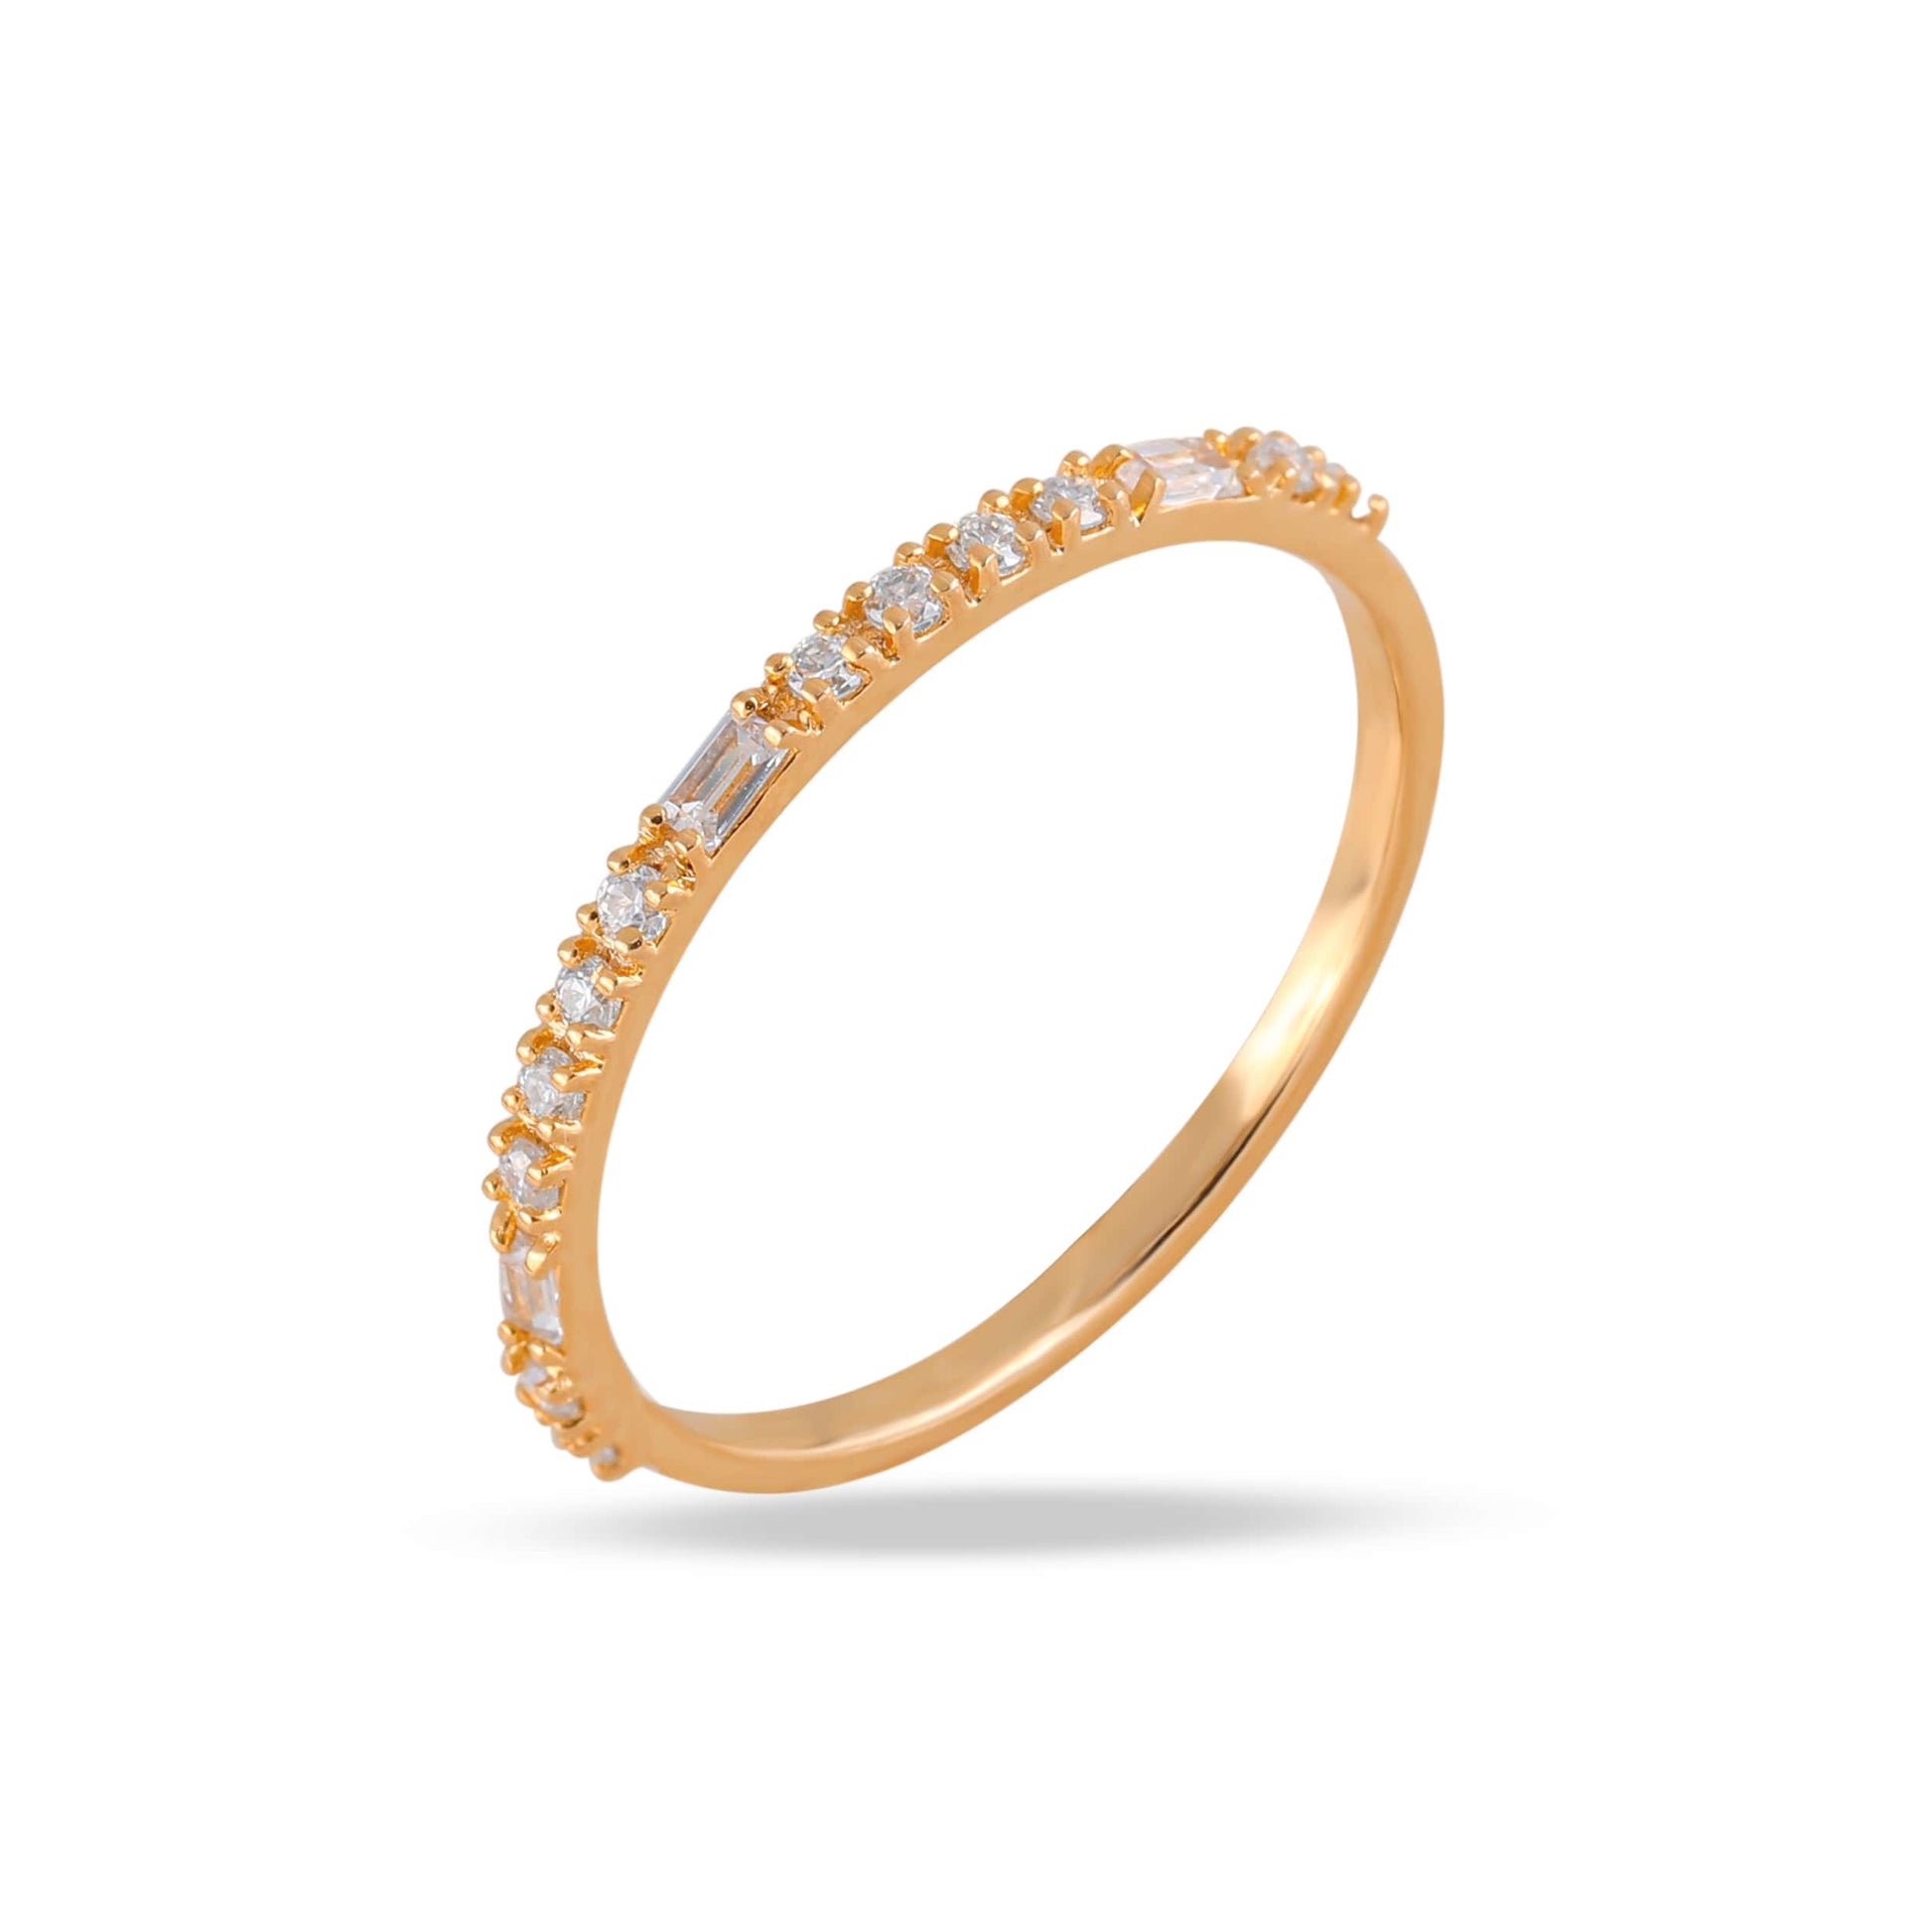 Glowing Solid 14kt Gold Diamond Ring For Woman